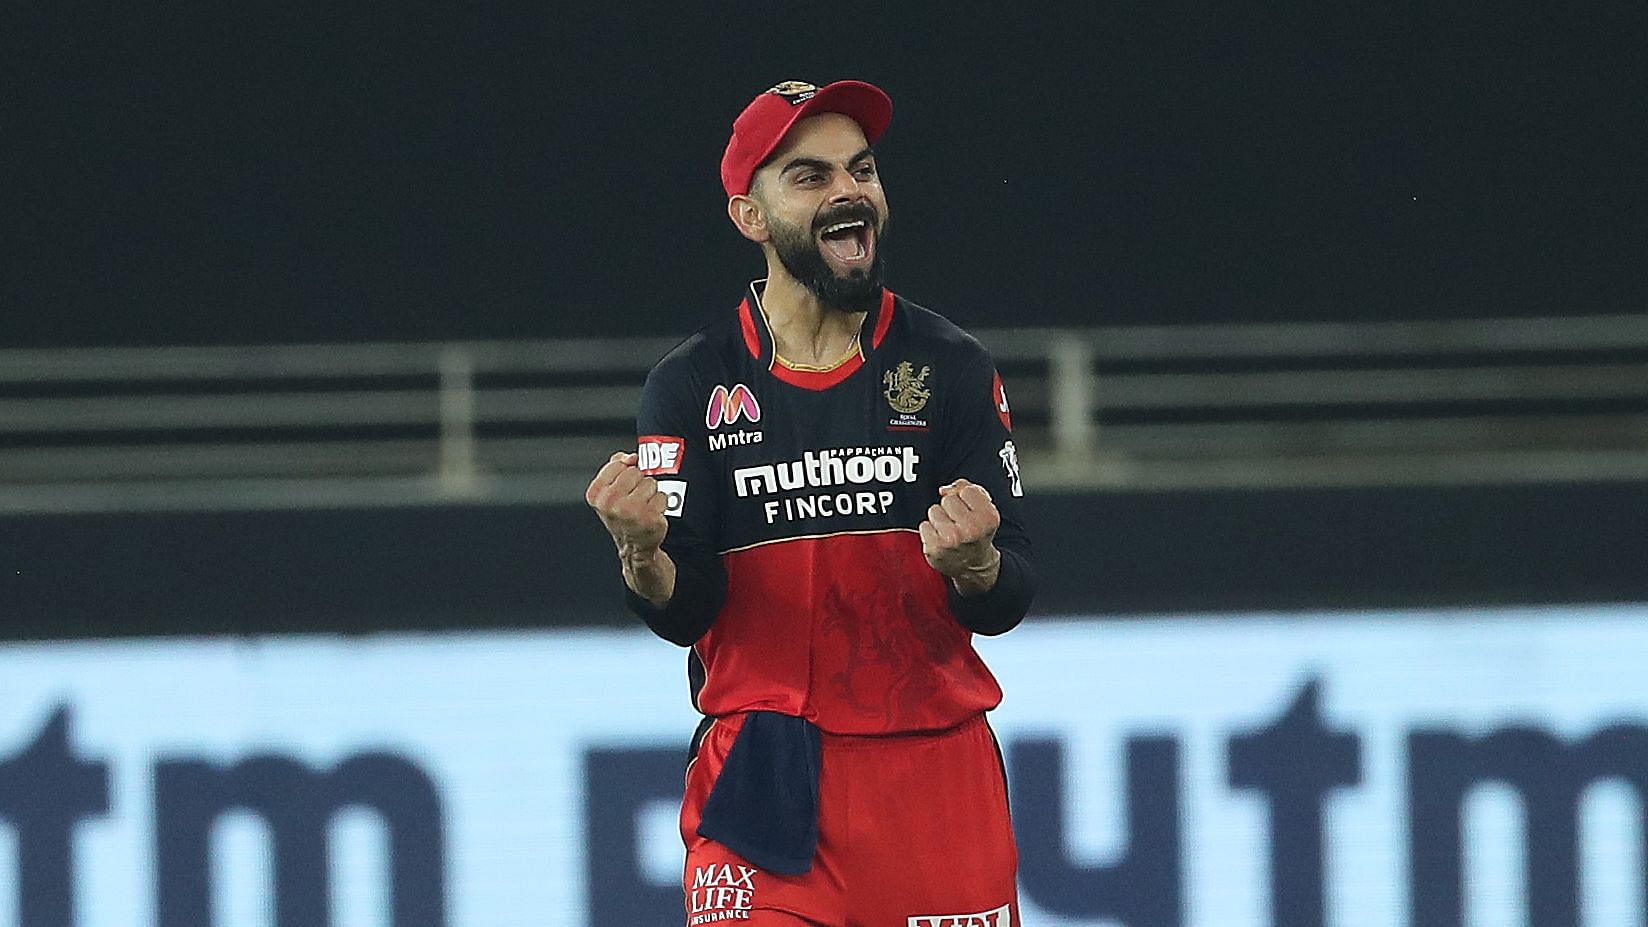 Royal Challengers Bangalore got their Indian Premier League campaign off to a winning start.